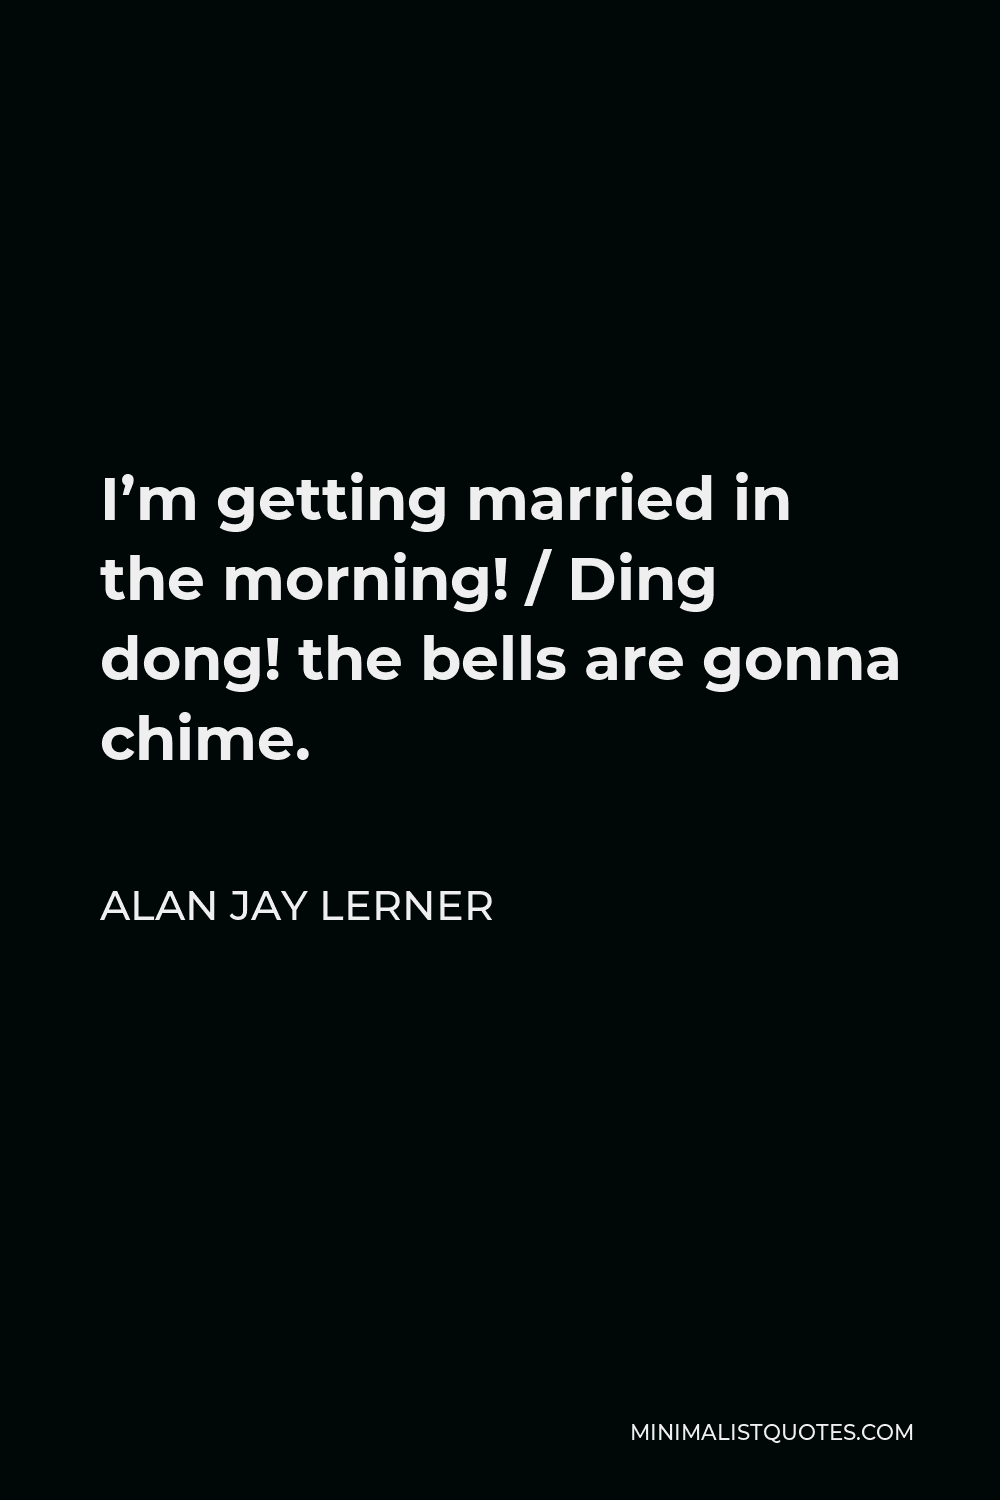 Alan Jay Lerner Quote - I’m getting married in the morning! / Ding dong! the bells are gonna chime.